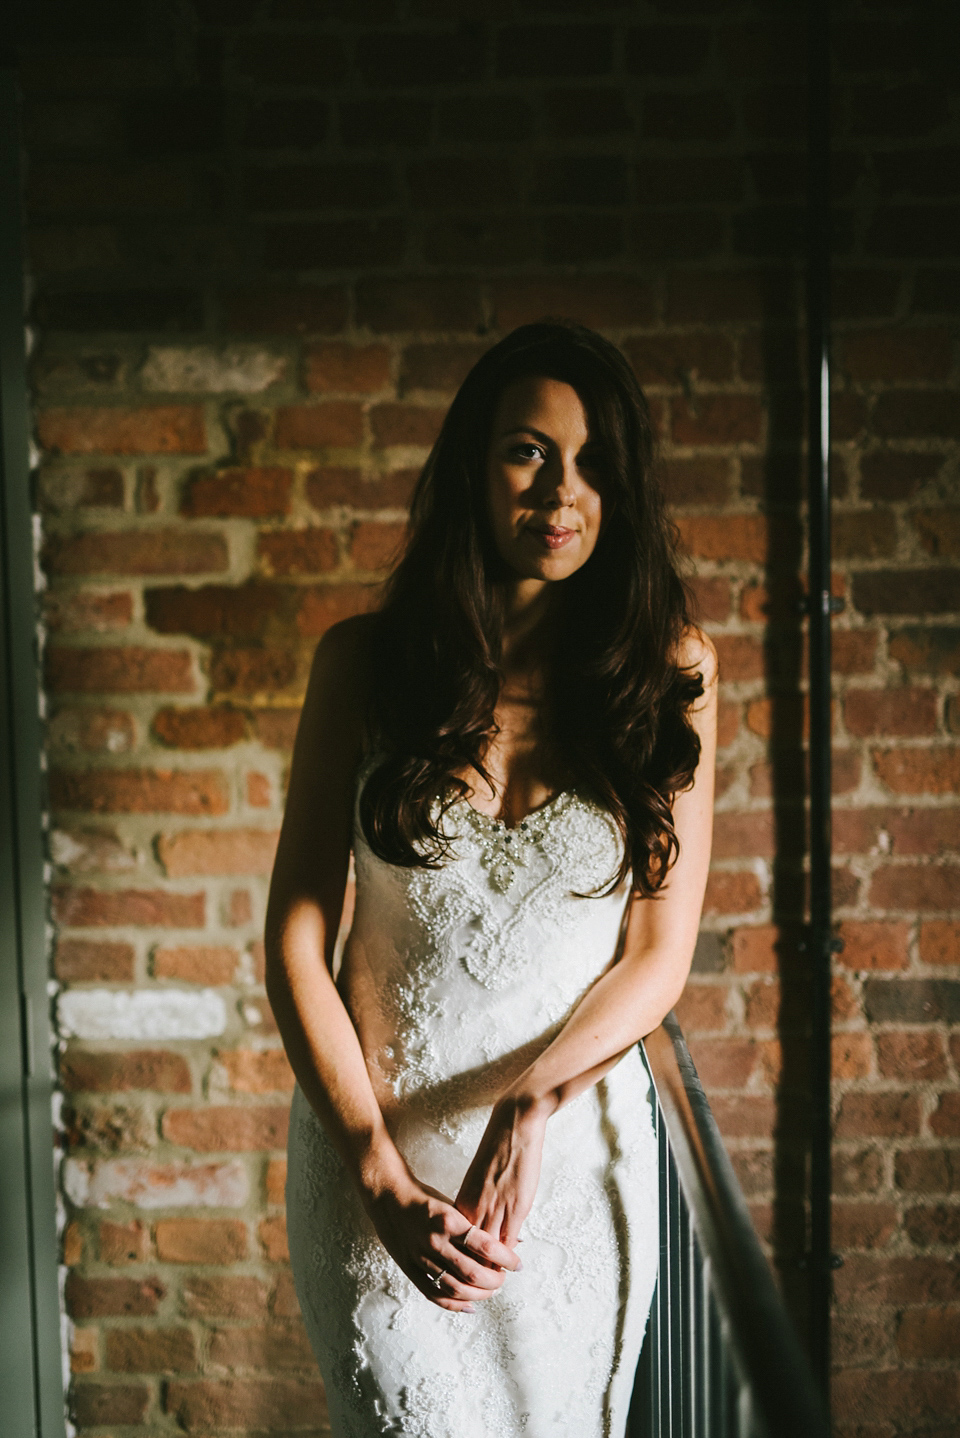 A Pronovias bride and her midwinter nights dream wedding. Photography by Ed Godden.